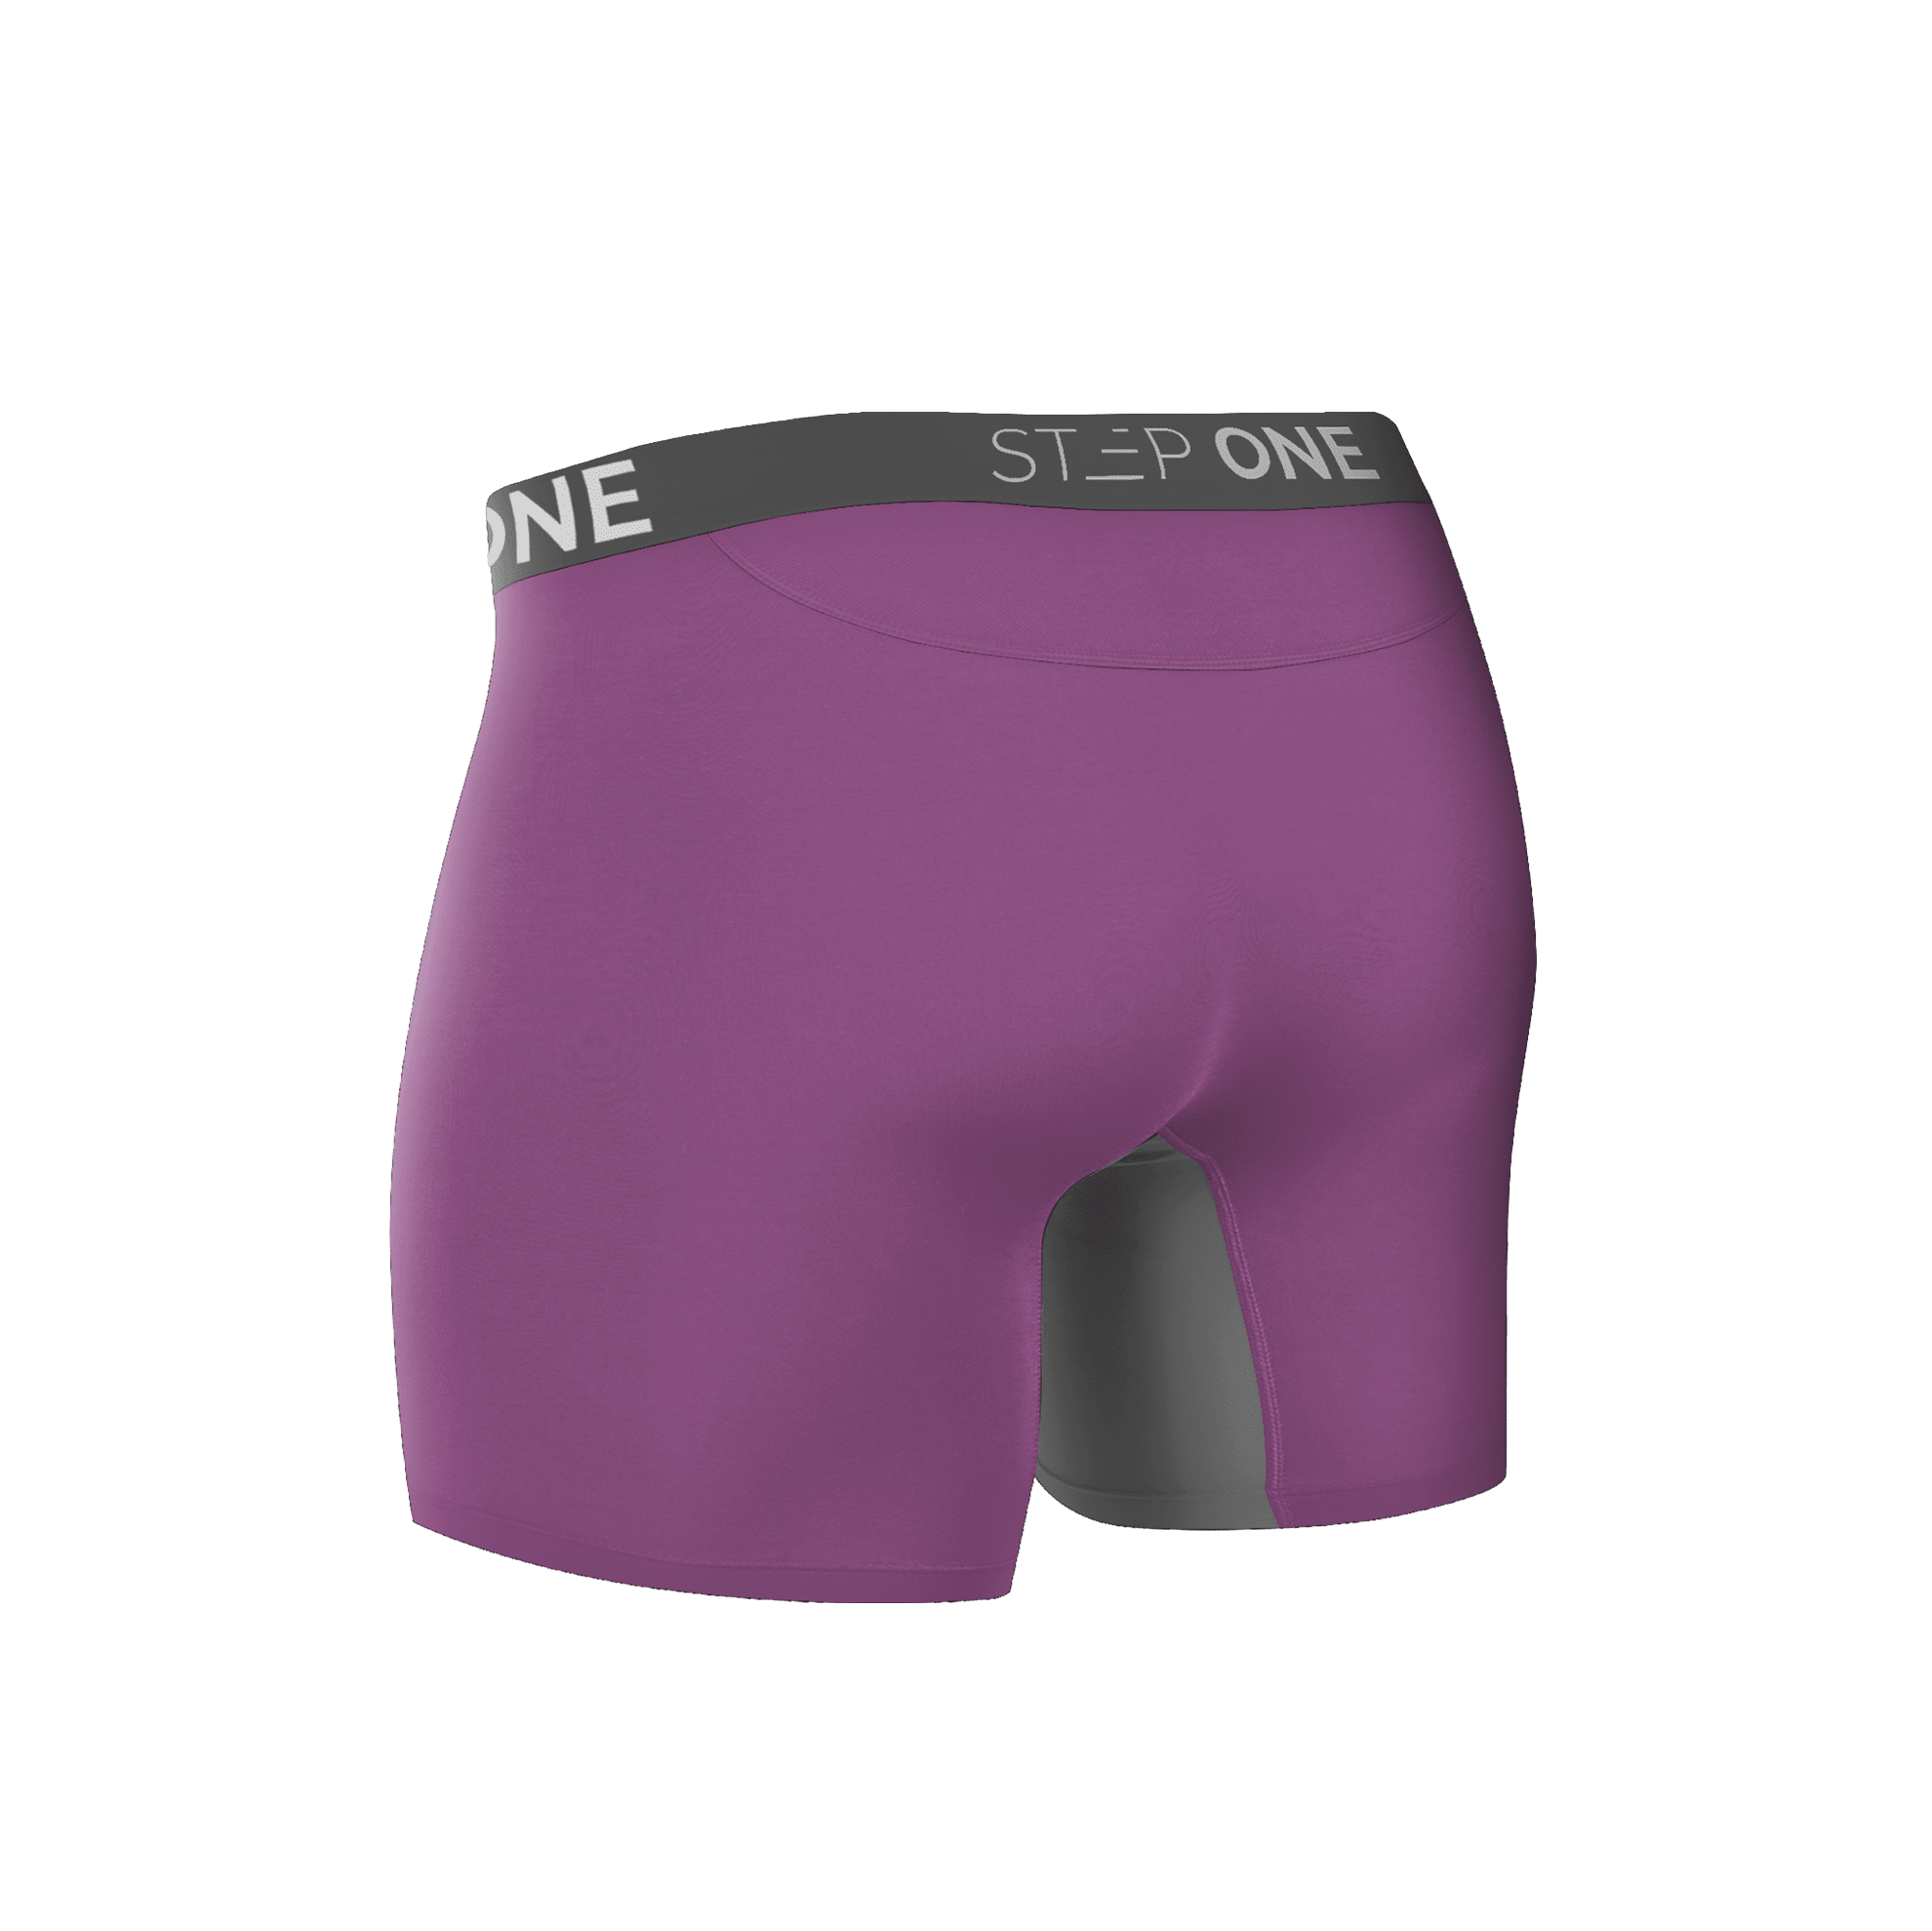 Mens Bamboo Underwear at Step One UK